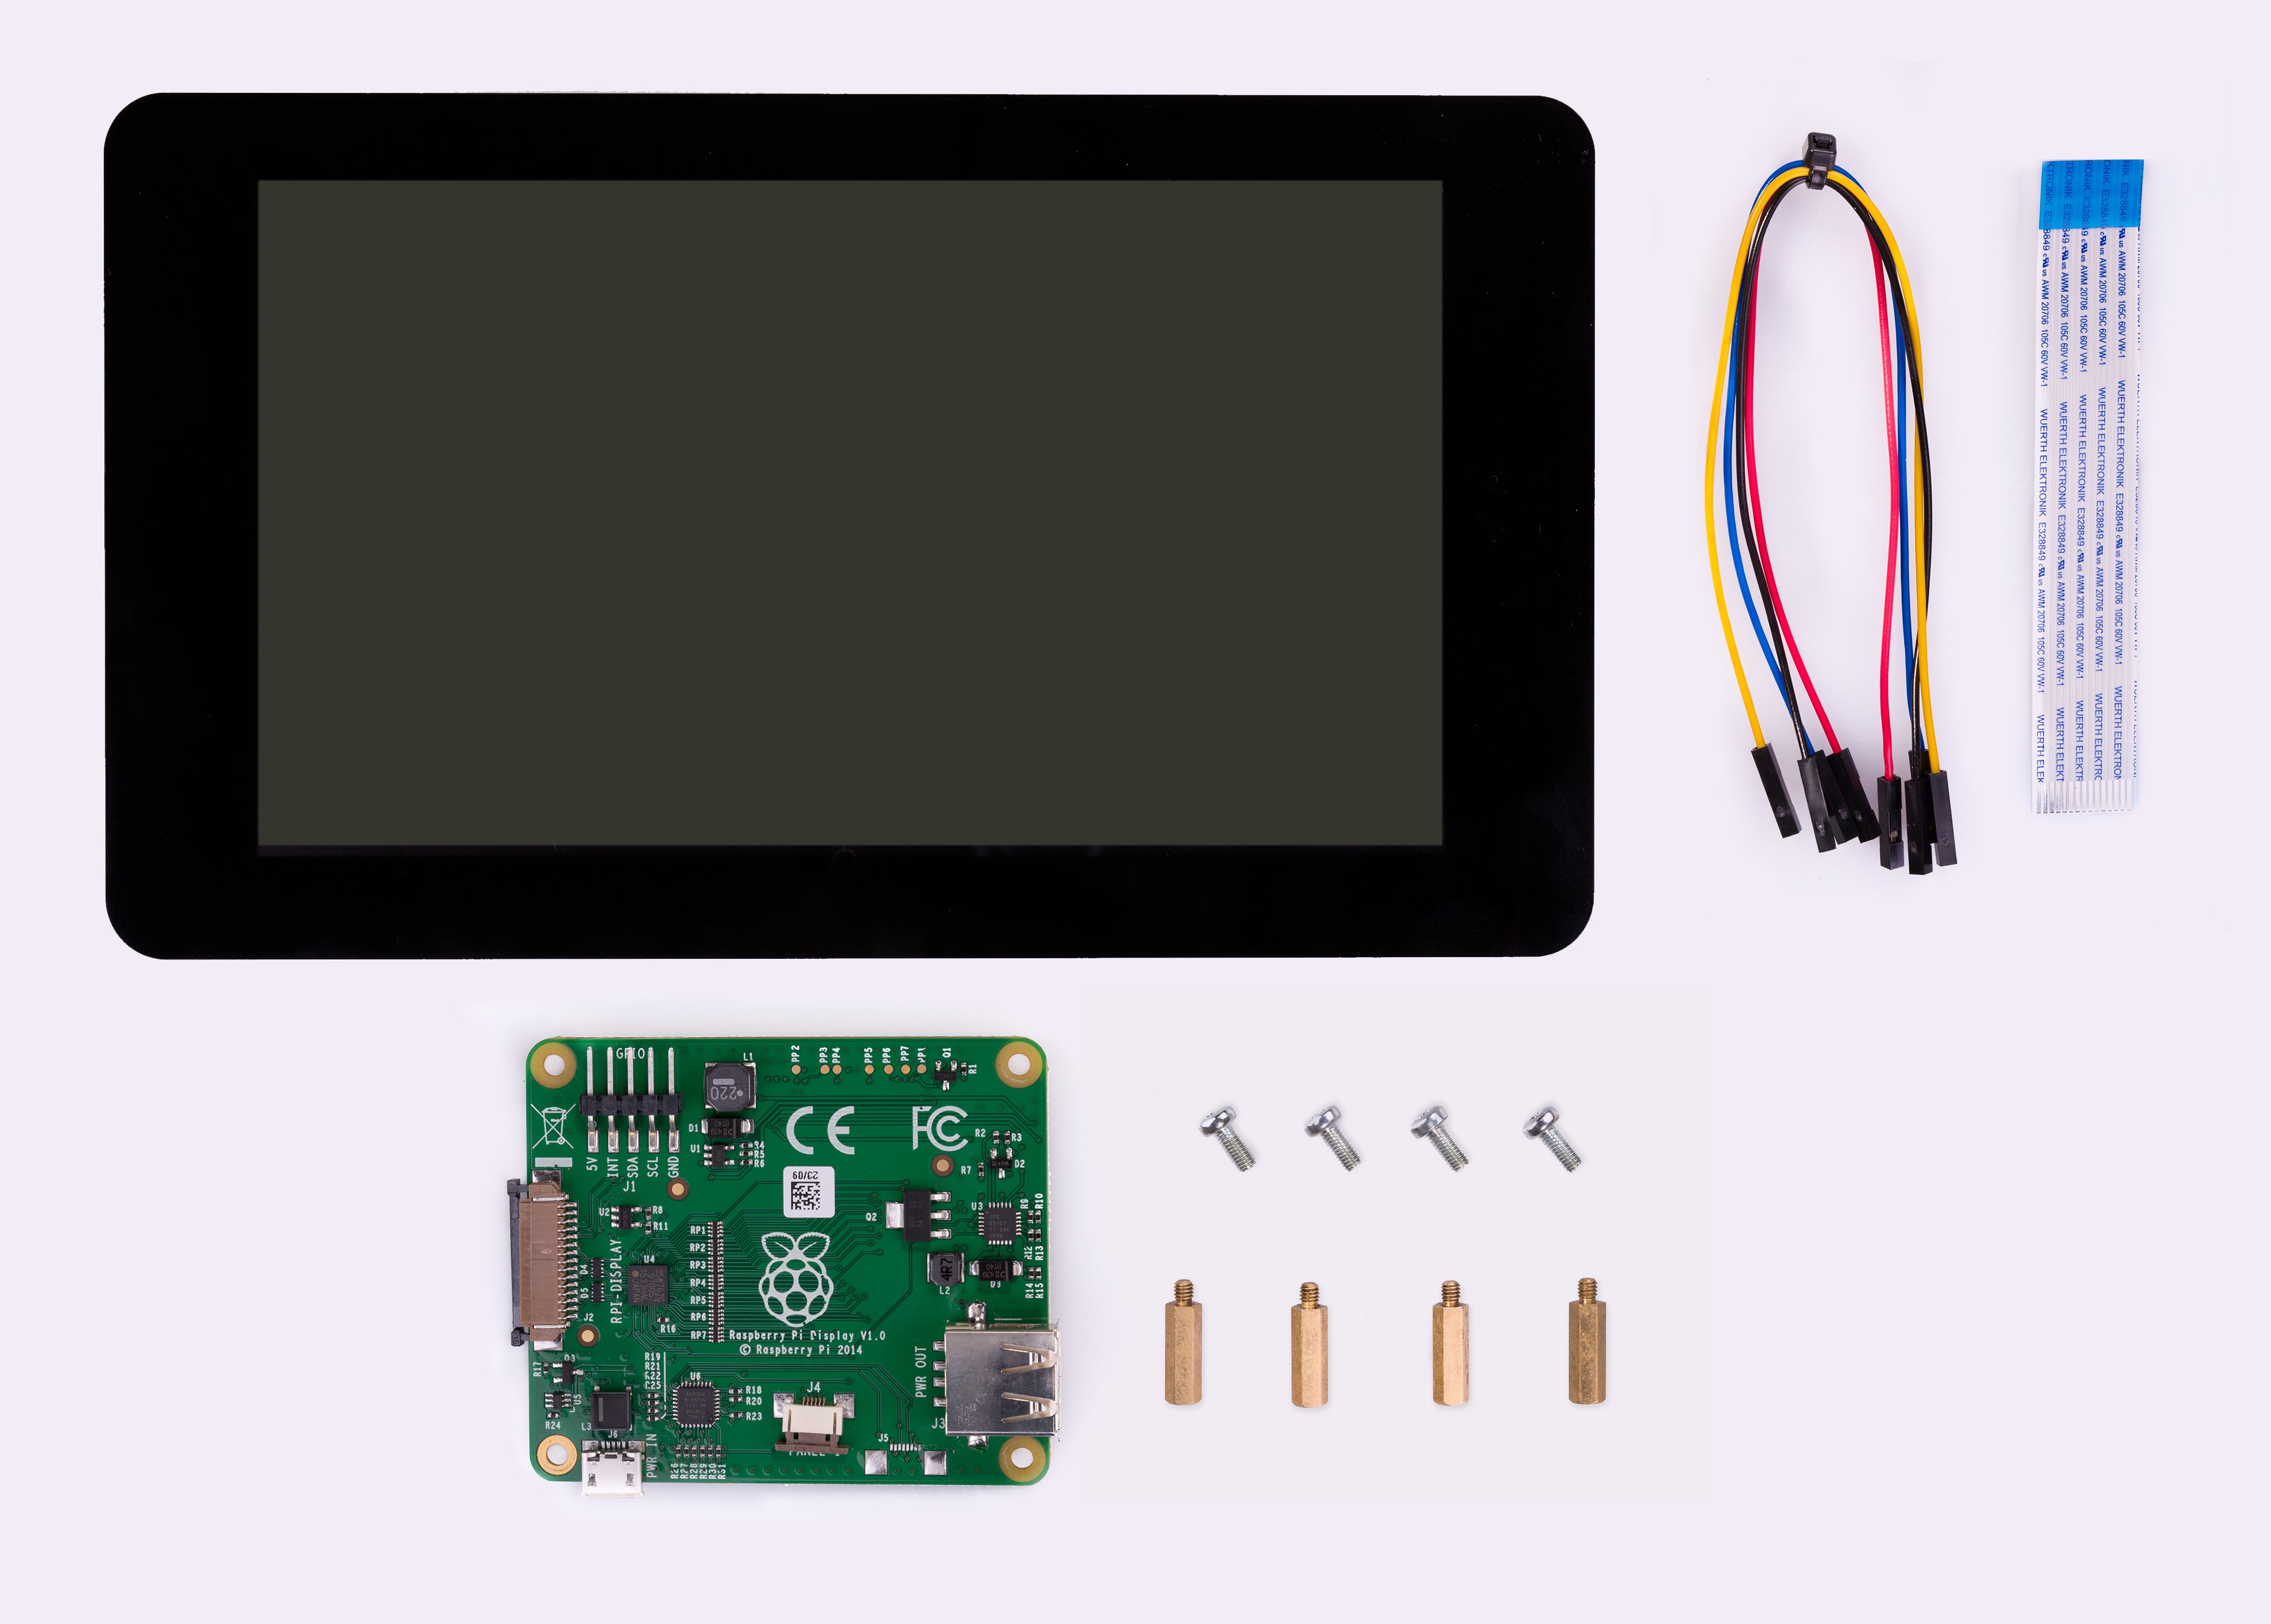 Official Raspberry Pi 7" Touch Display (1 Per Customer , Per Month)